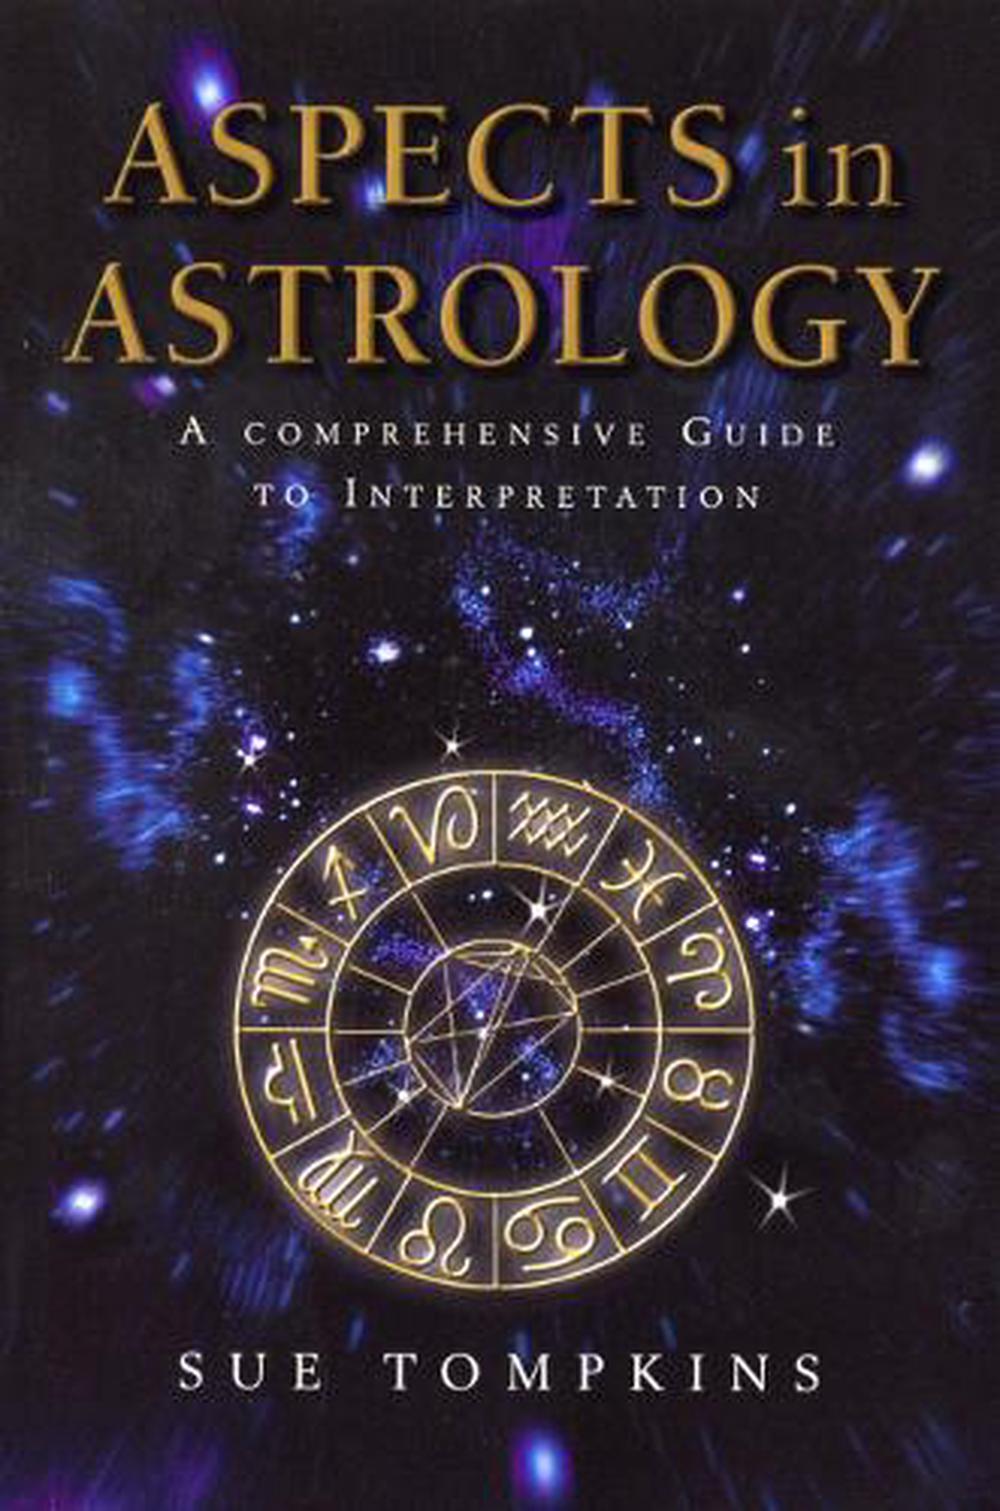 free books on astrology download